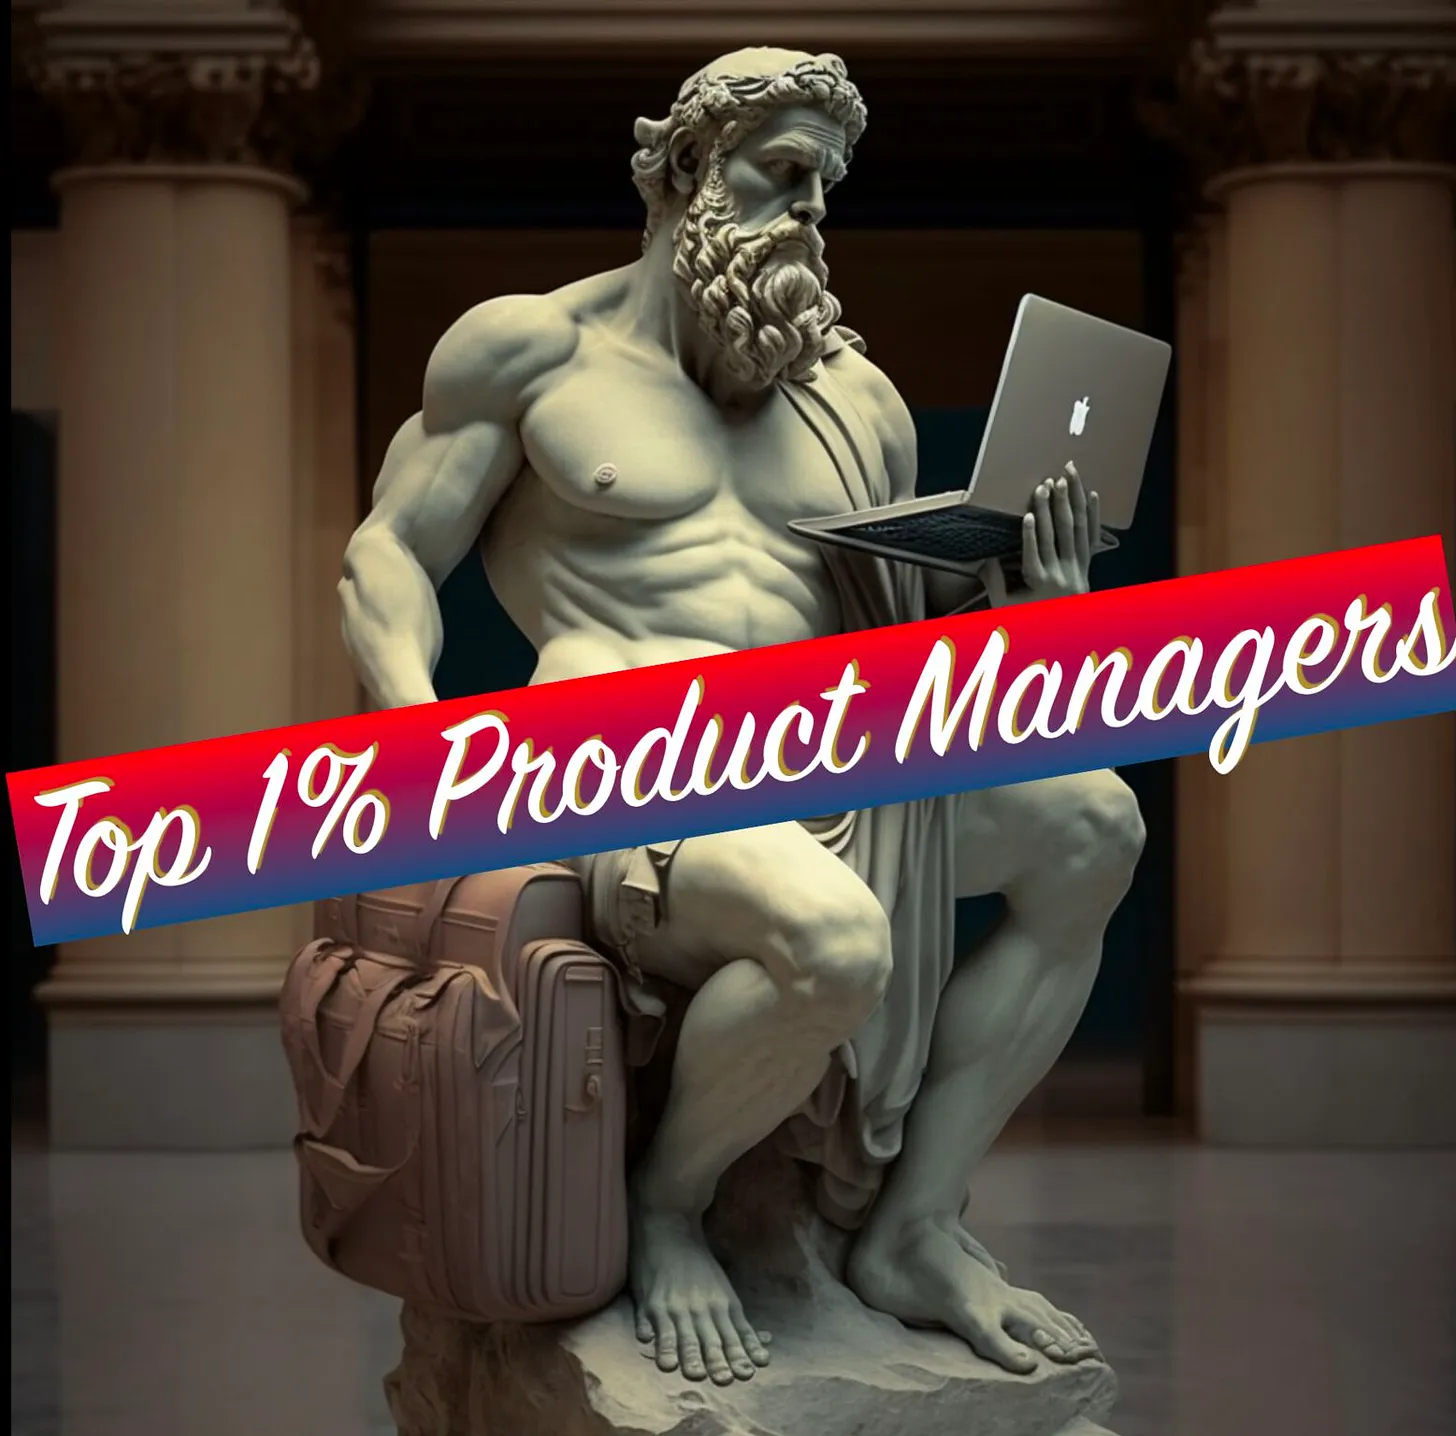 TBM 8/52: Top 1% Product Managers